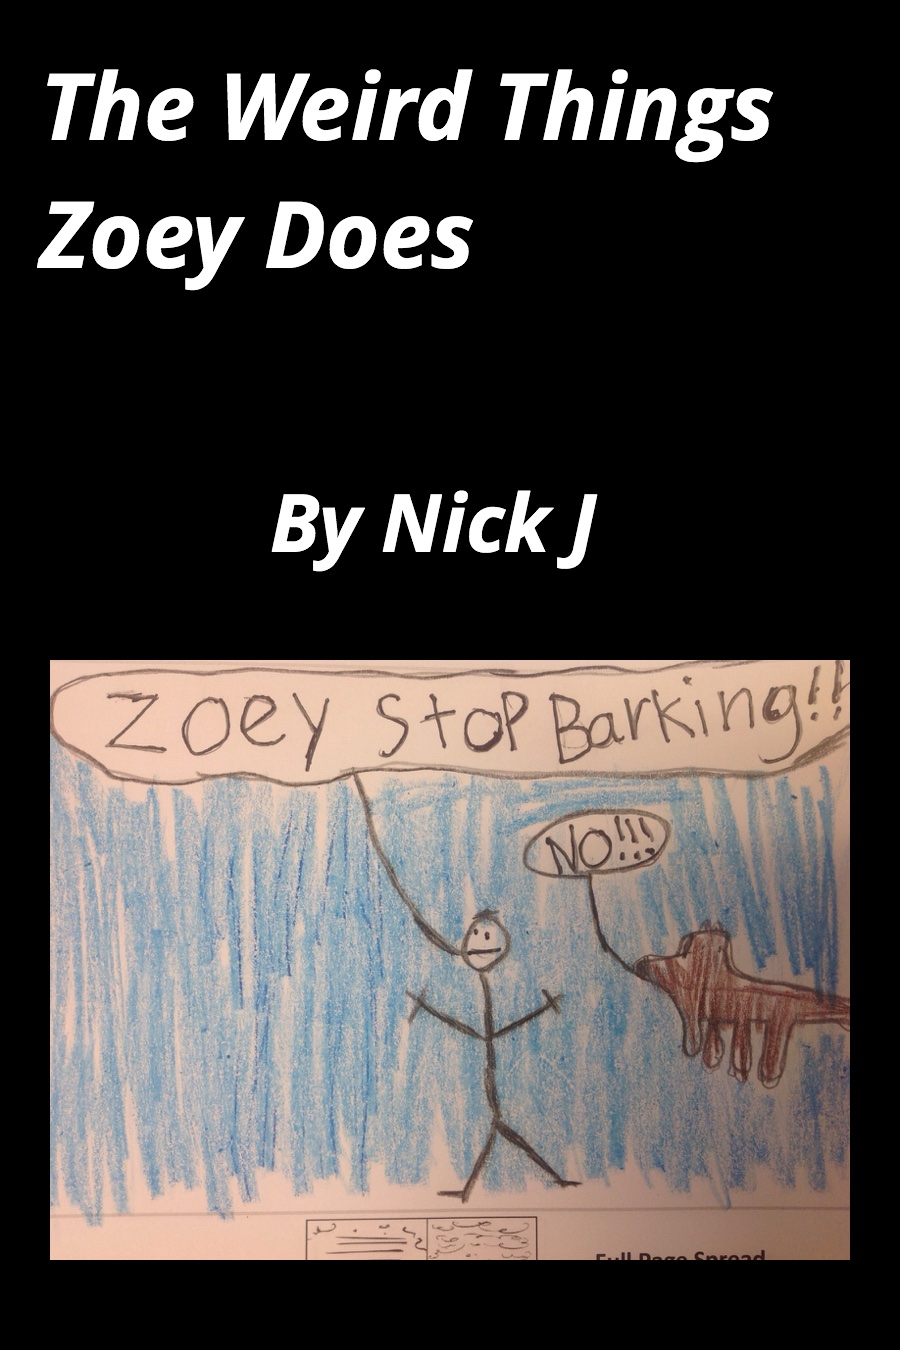 The Weird Things Zoey Does by Nick J-1